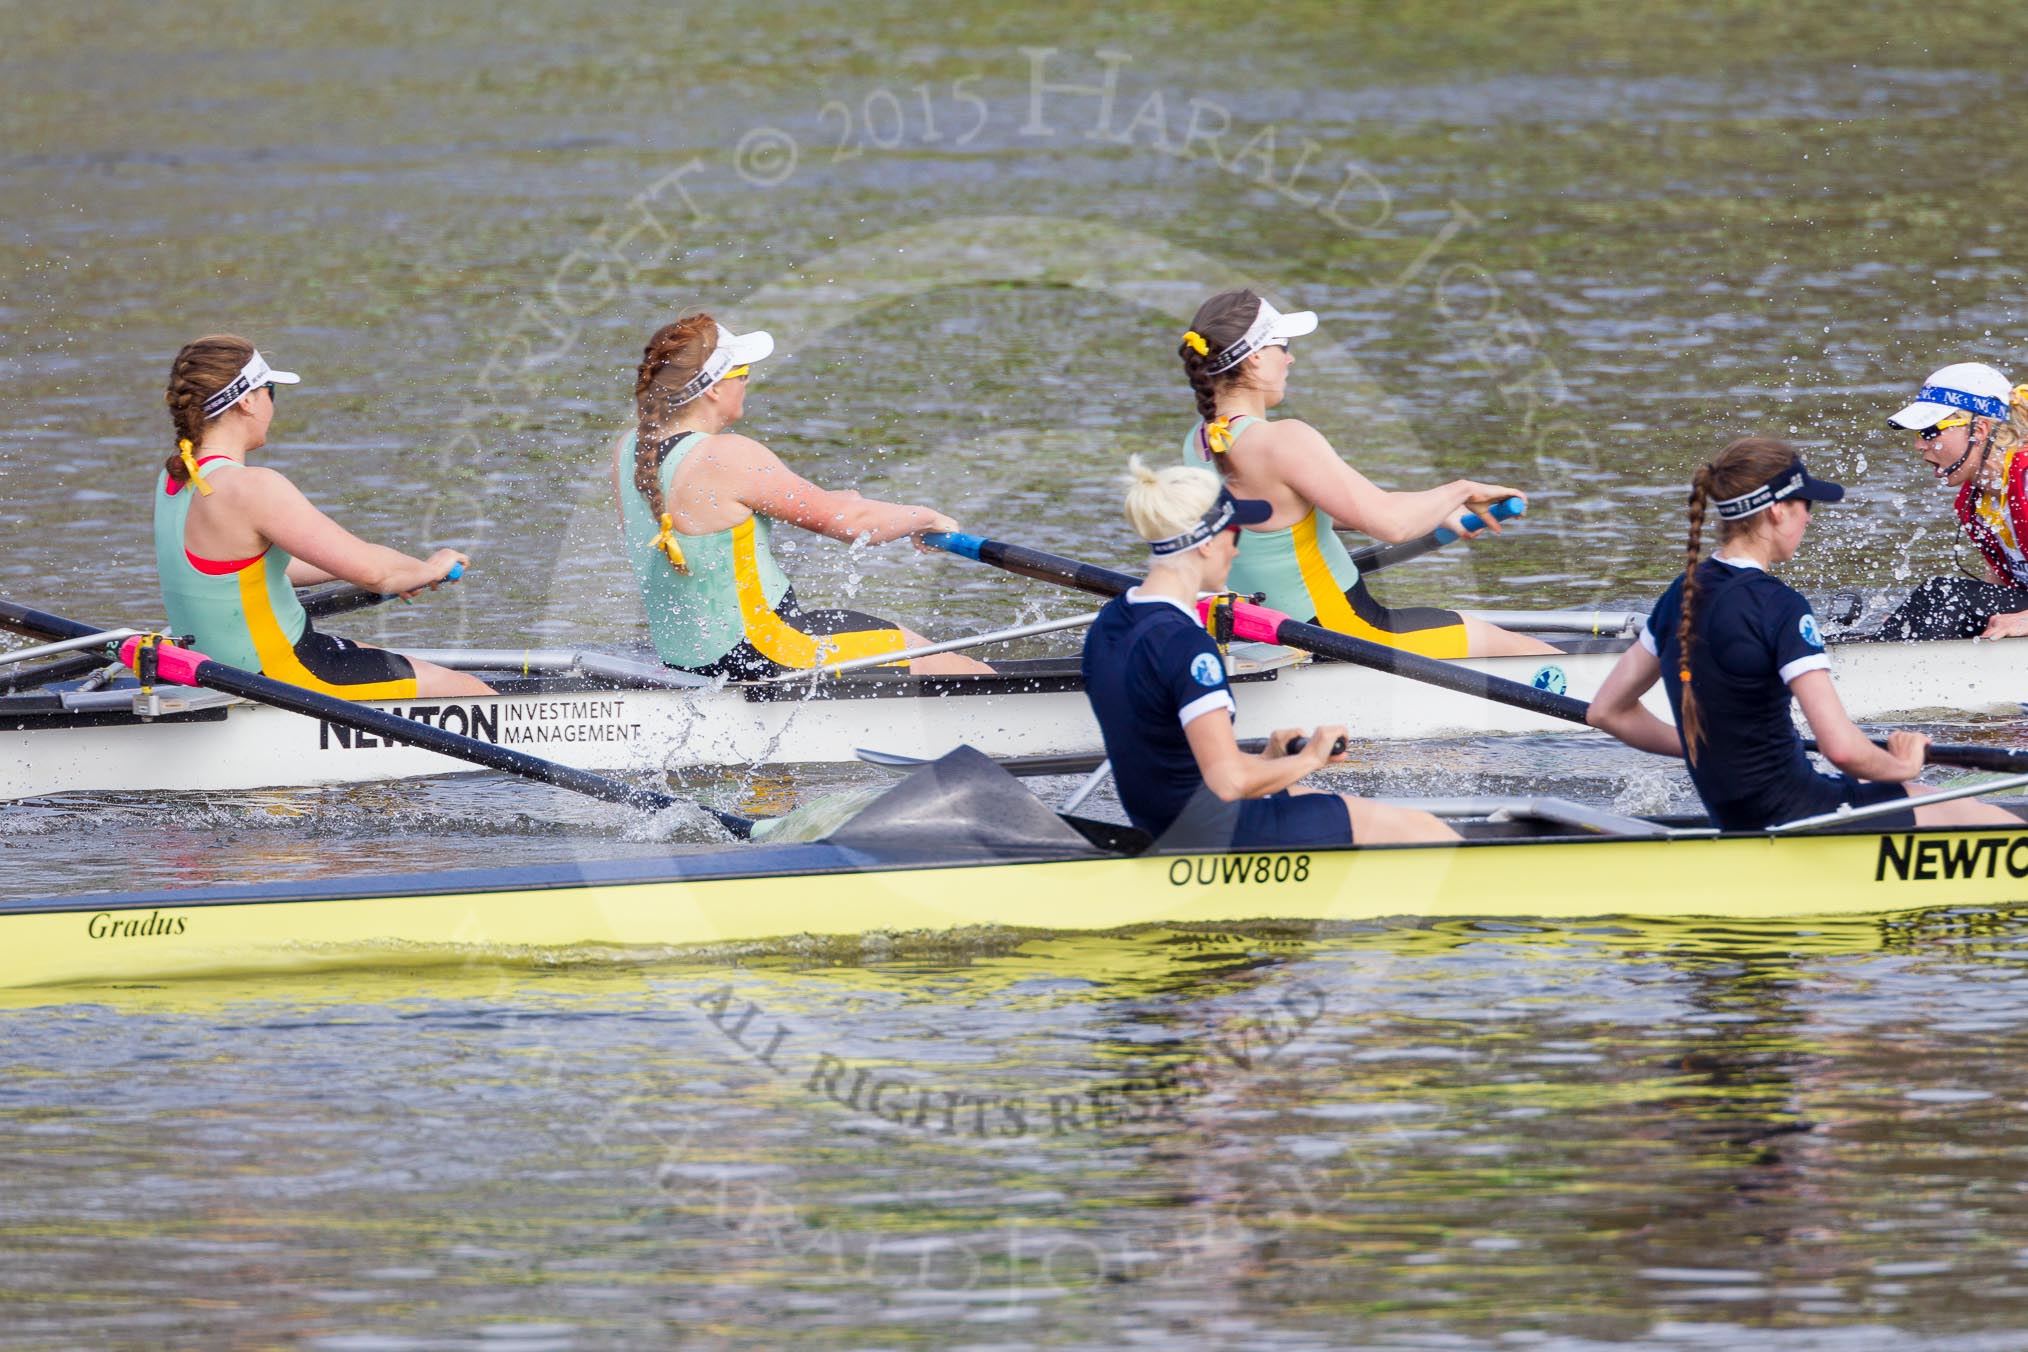 The Boat Race season 2015 - Newton Women's Boat Race.
River Thames between Putney and Mortlake,
London,

United Kingdom,
on 10 April 2015 at 16:02, image #107